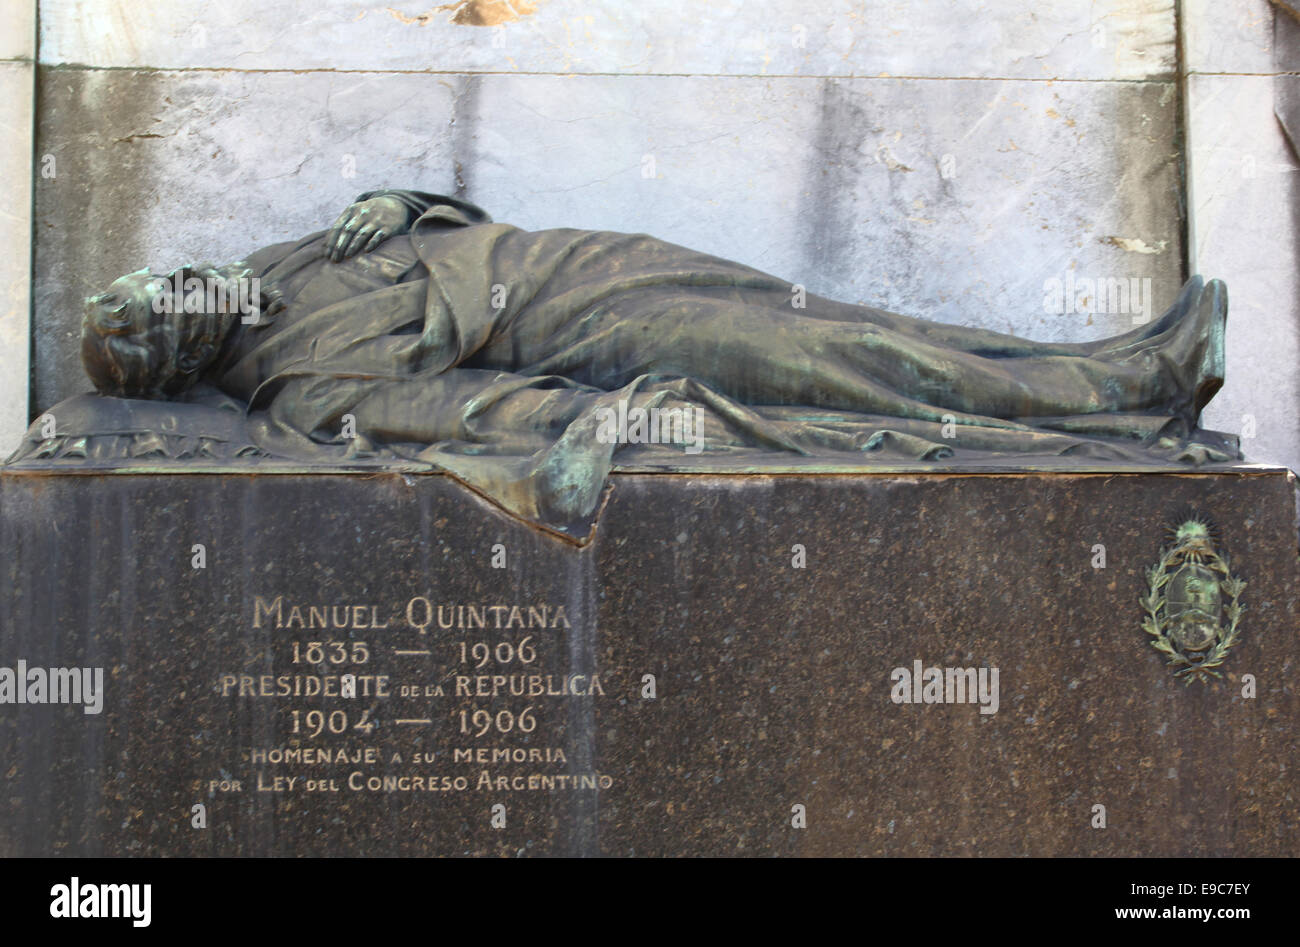 Homage to the memory of Manuel Quintana, former president of Argentina. Recoleta monumental cemetery, Buenos Aires, Argentina. Stock Photo